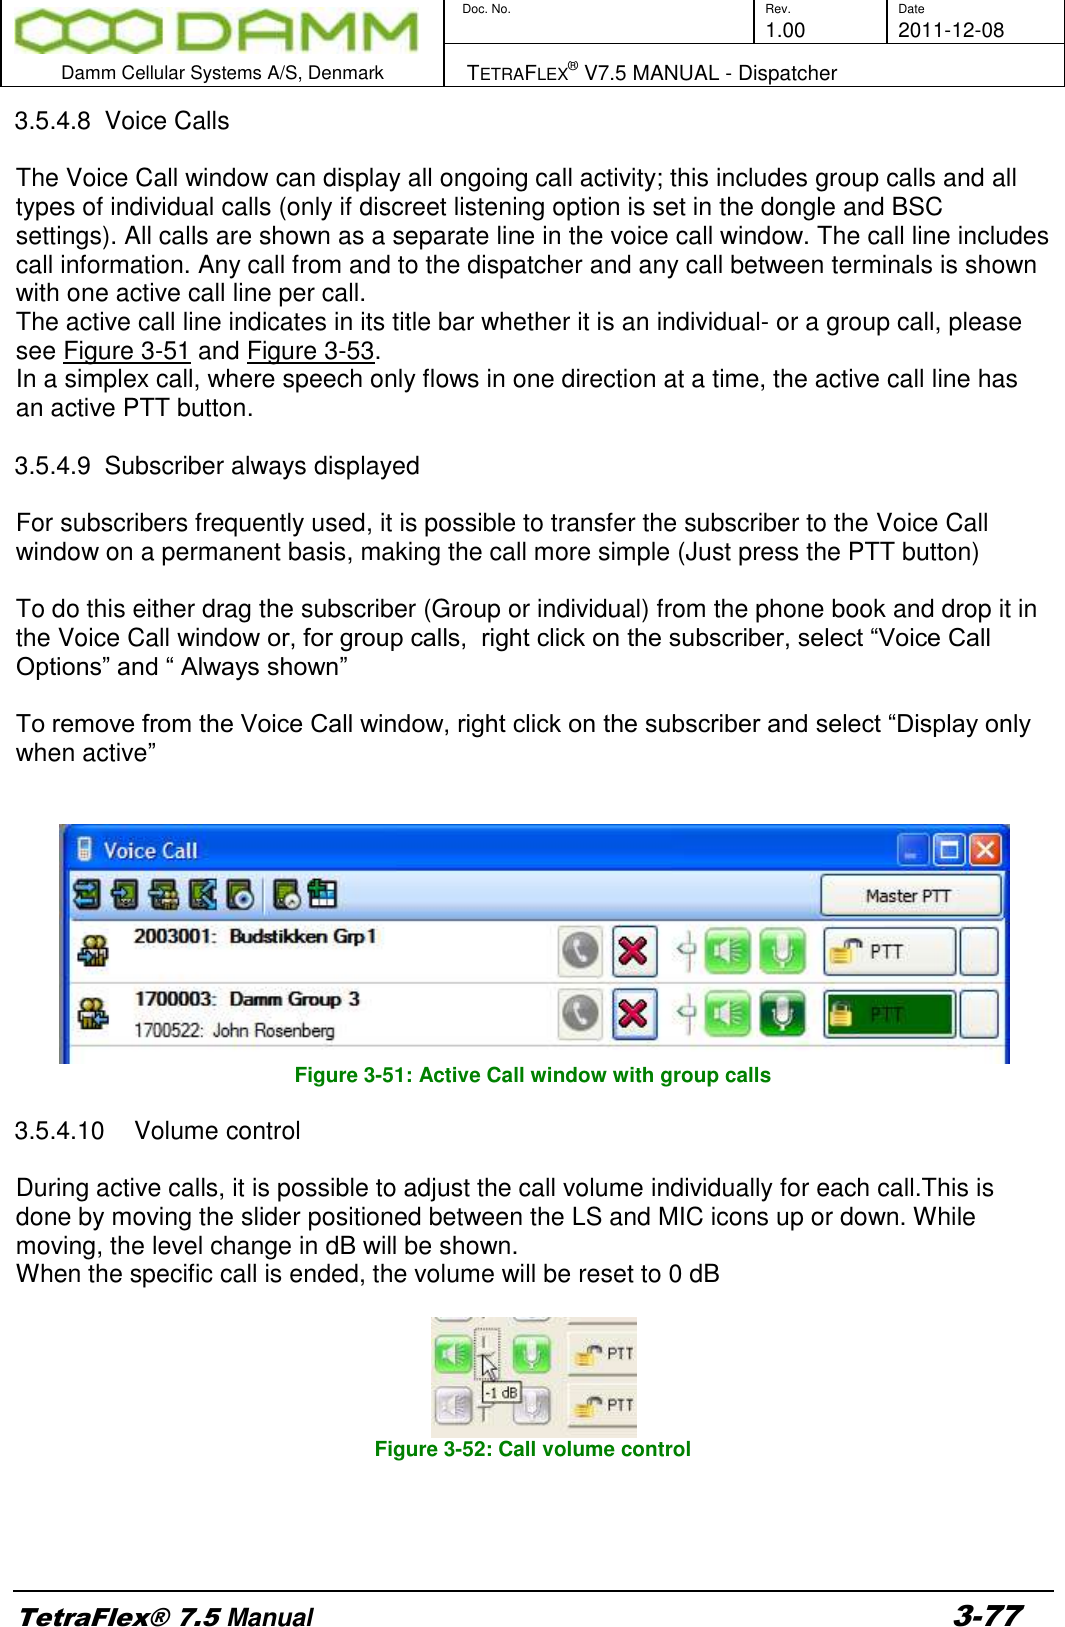        Doc. No. Rev. Date     1.00 2011-12-08  Damm Cellular Systems A/S, Denmark   TETRAFLEX® V7.5 MANUAL - Dispatcher  TetraFlex® 7.5 Manual 3-77 3.5.4.8  Voice Calls  The Voice Call window can display all ongoing call activity; this includes group calls and all types of individual calls (only if discreet listening option is set in the dongle and BSC settings). All calls are shown as a separate line in the voice call window. The call line includes call information. Any call from and to the dispatcher and any call between terminals is shown with one active call line per call. The active call line indicates in its title bar whether it is an individual- or a group call, please see Figure 3-51 and Figure 3-53.  In a simplex call, where speech only flows in one direction at a time, the active call line has an active PTT button.   3.5.4.9  Subscriber always displayed  For subscribers frequently used, it is possible to transfer the subscriber to the Voice Call window on a permanent basis, making the call more simple (Just press the PTT button)  To do this either drag the subscriber (Group or individual) from the phone book and drop it in the Voice Call window or, for group calls,  right click on the subscriber, select “Voice Call Options” and “ Always shown”  To remove from the Voice Call window, right click on the subscriber and select “Display only when active”    Figure 3-51: Active Call window with group calls  3.5.4.10  Volume control  During active calls, it is possible to adjust the call volume individually for each call.This is done by moving the slider positioned between the LS and MIC icons up or down. While moving, the level change in dB will be shown. When the specific call is ended, the volume will be reset to 0 dB    Figure 3-52: Call volume control    